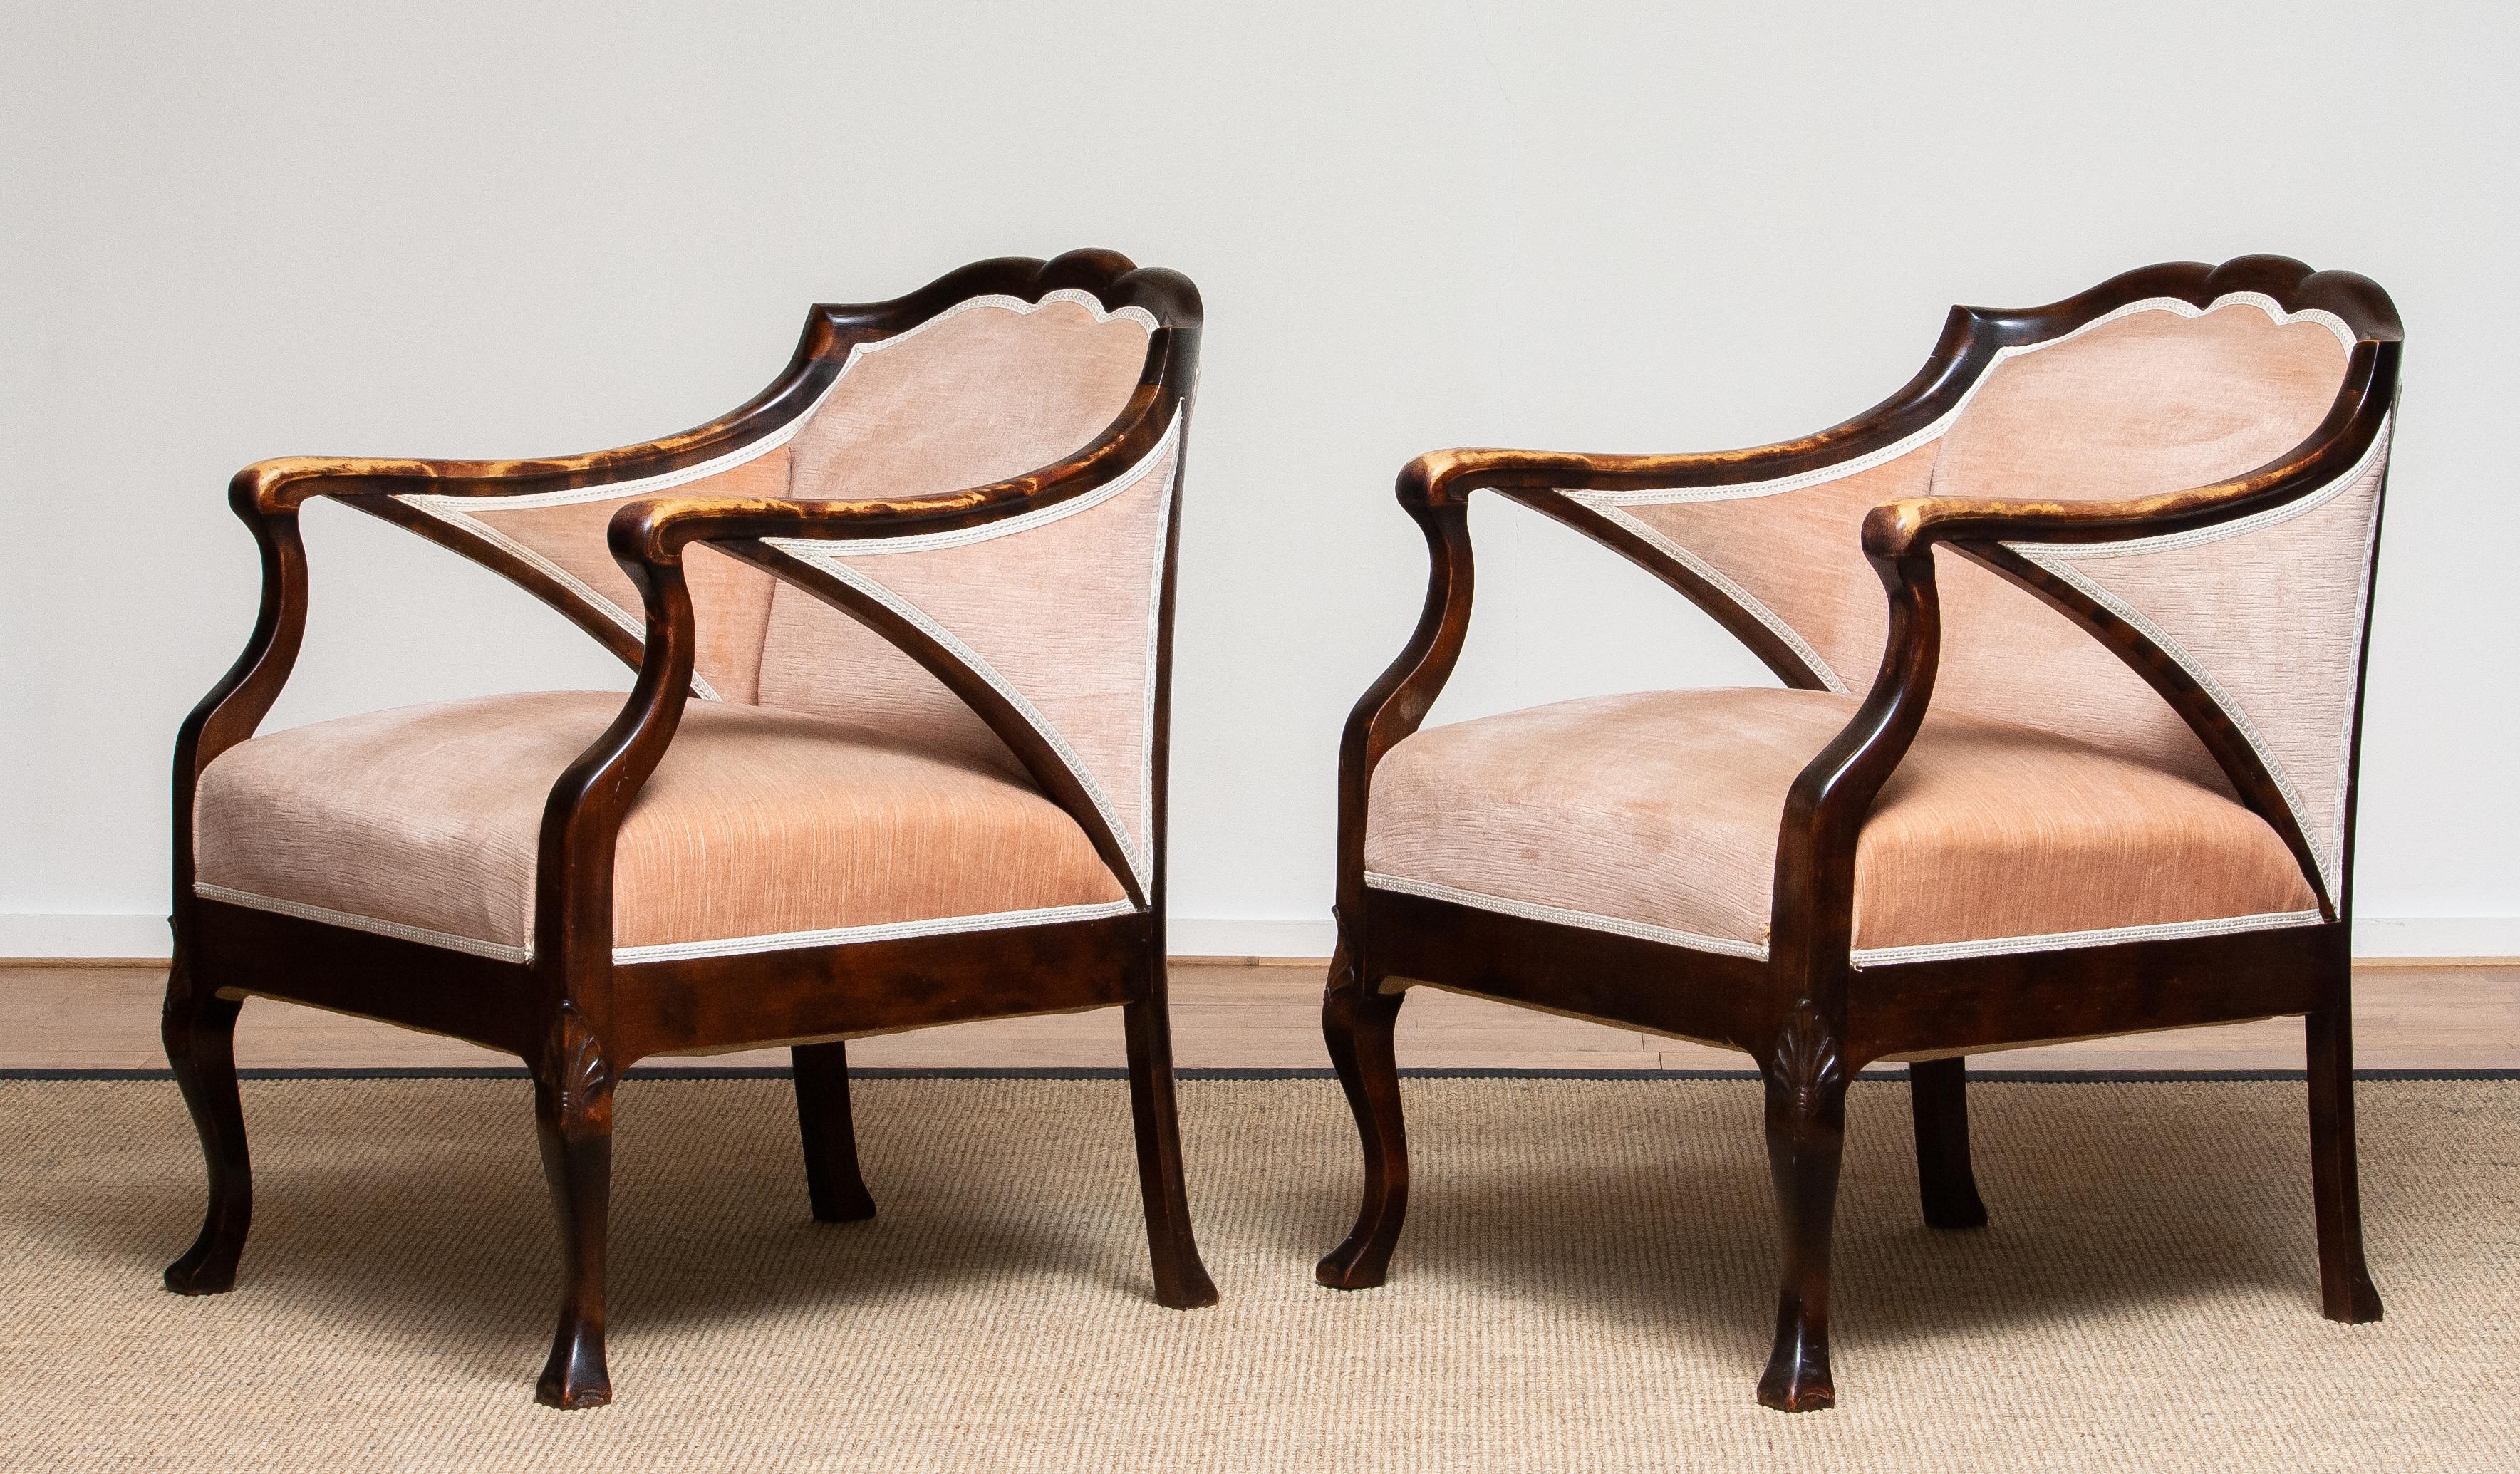 Beautiful set of two Art Nouveau easy Stockholm chairs in beech upholstered with Salmon color velvet after Fritz Hennings from the 1930's.
What makes the chairs particularly beautiful is the discoloration on the armrests over the years.
Both